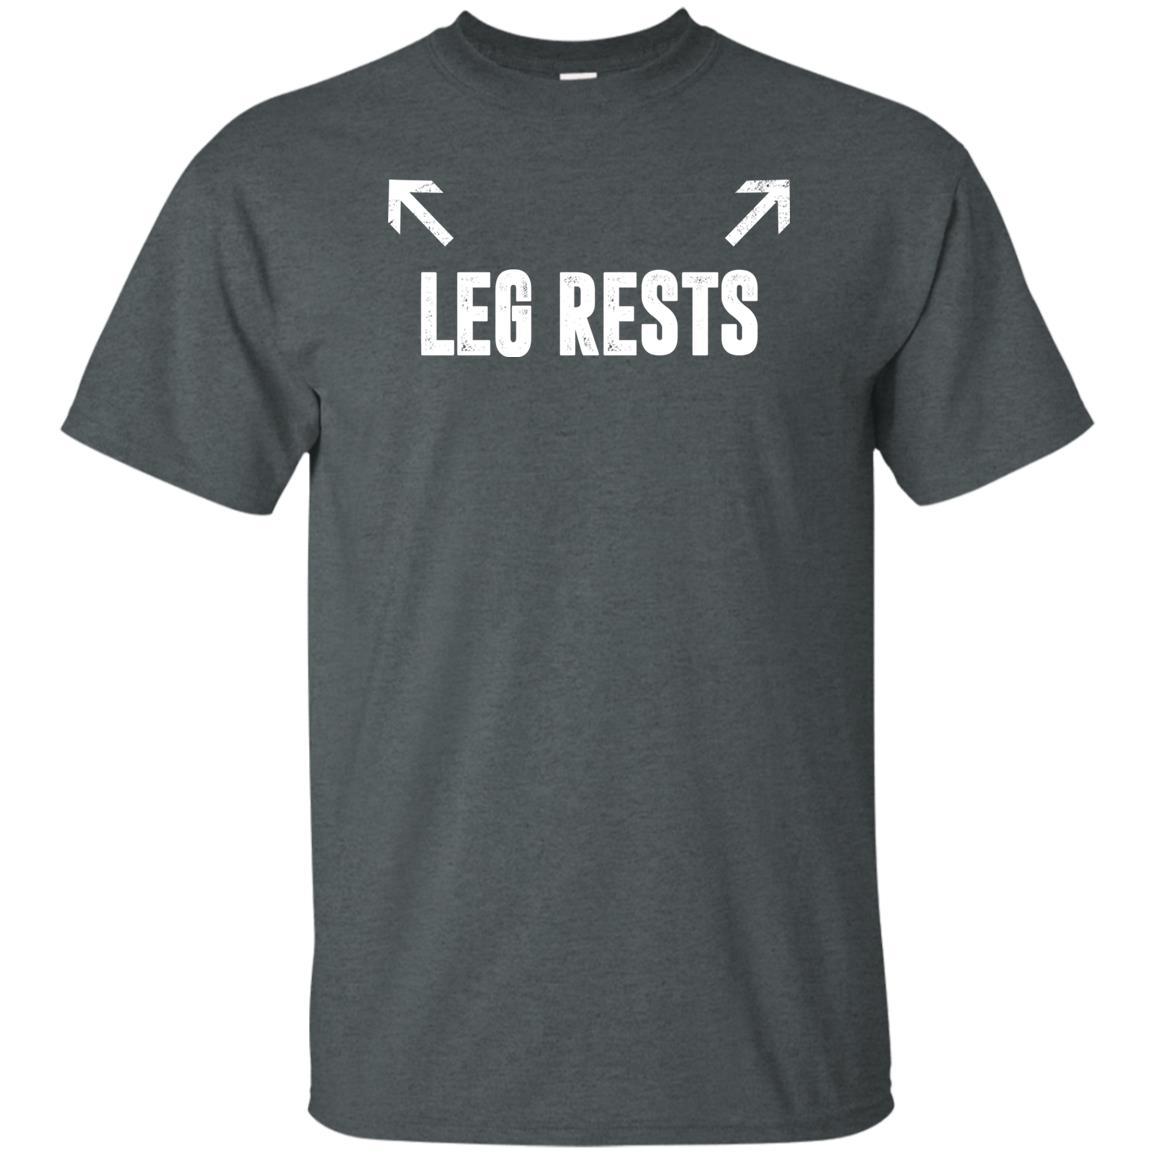 Leg Rests Cotton Tee – The Dude's Threads